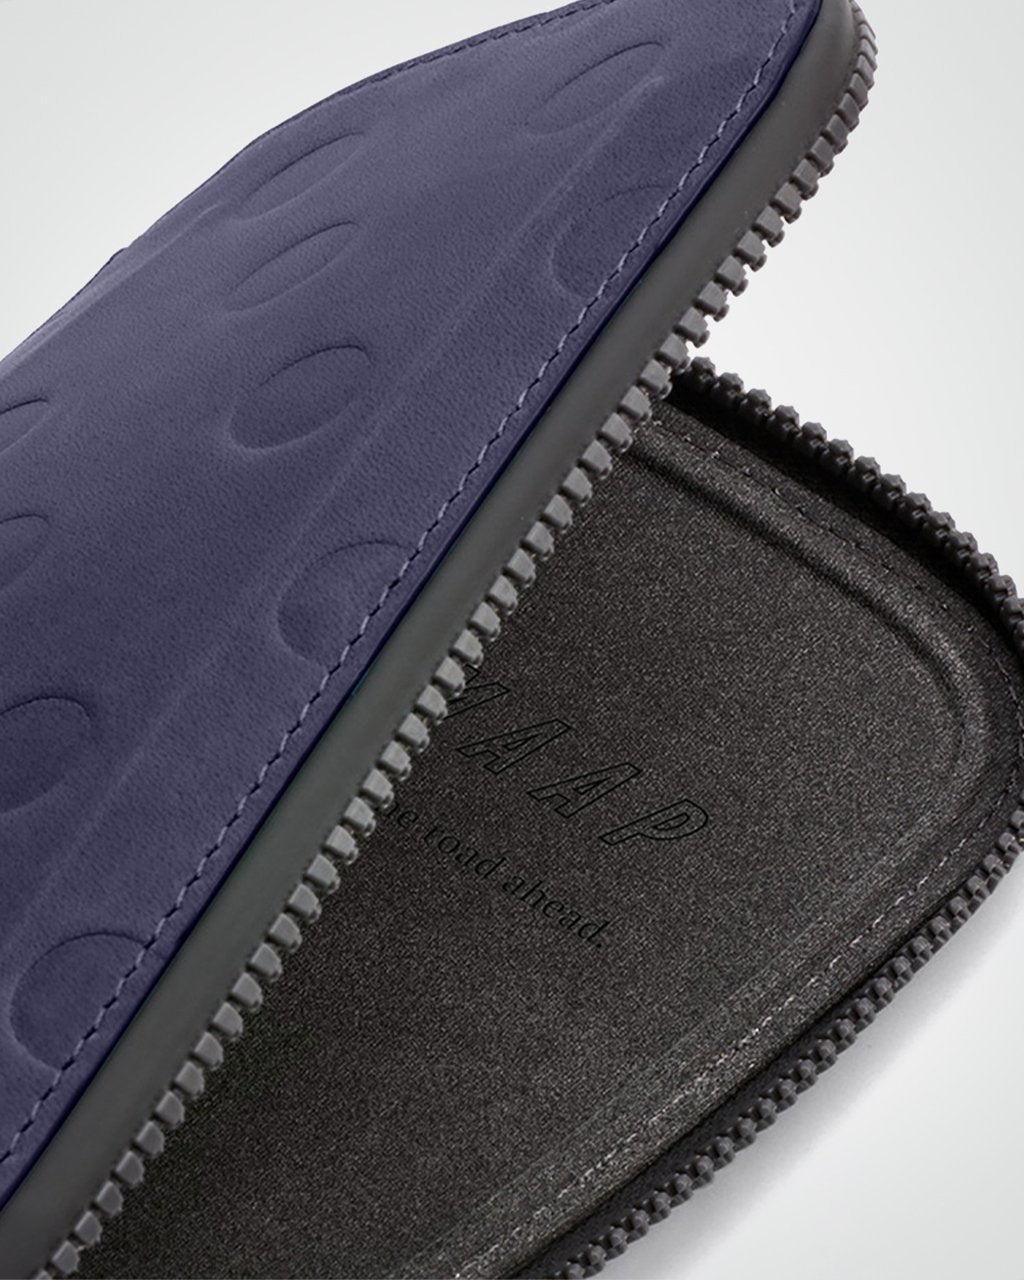 MAAP x Bellroy All-Conditions PhOne Pocket